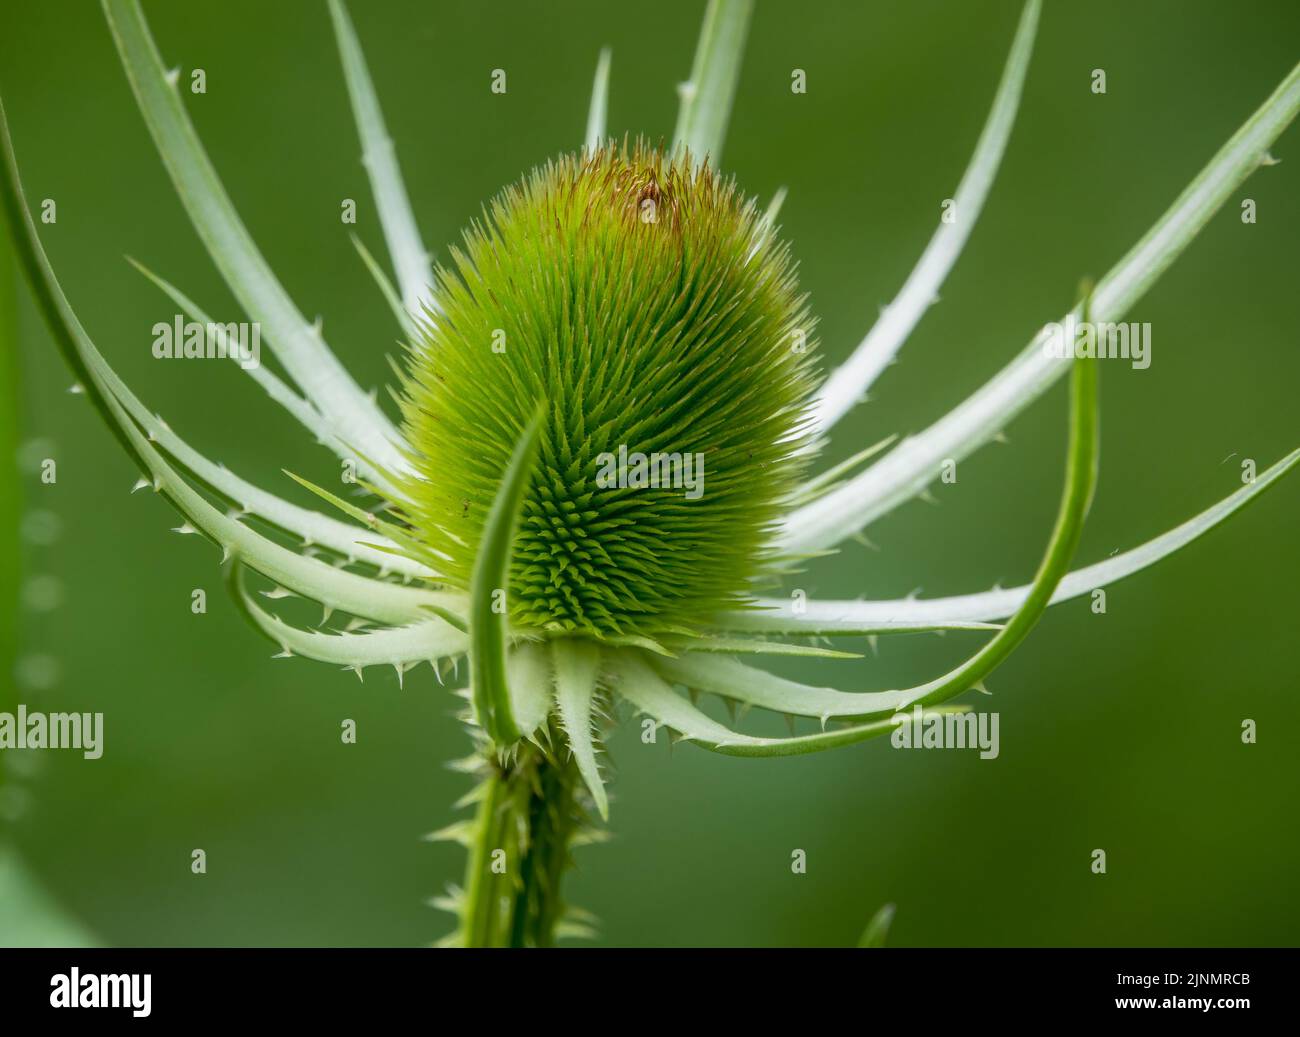 close-up of a summer green wild teasel (Dipsacus fullonum ) prickly spiky thistle Stock Photo